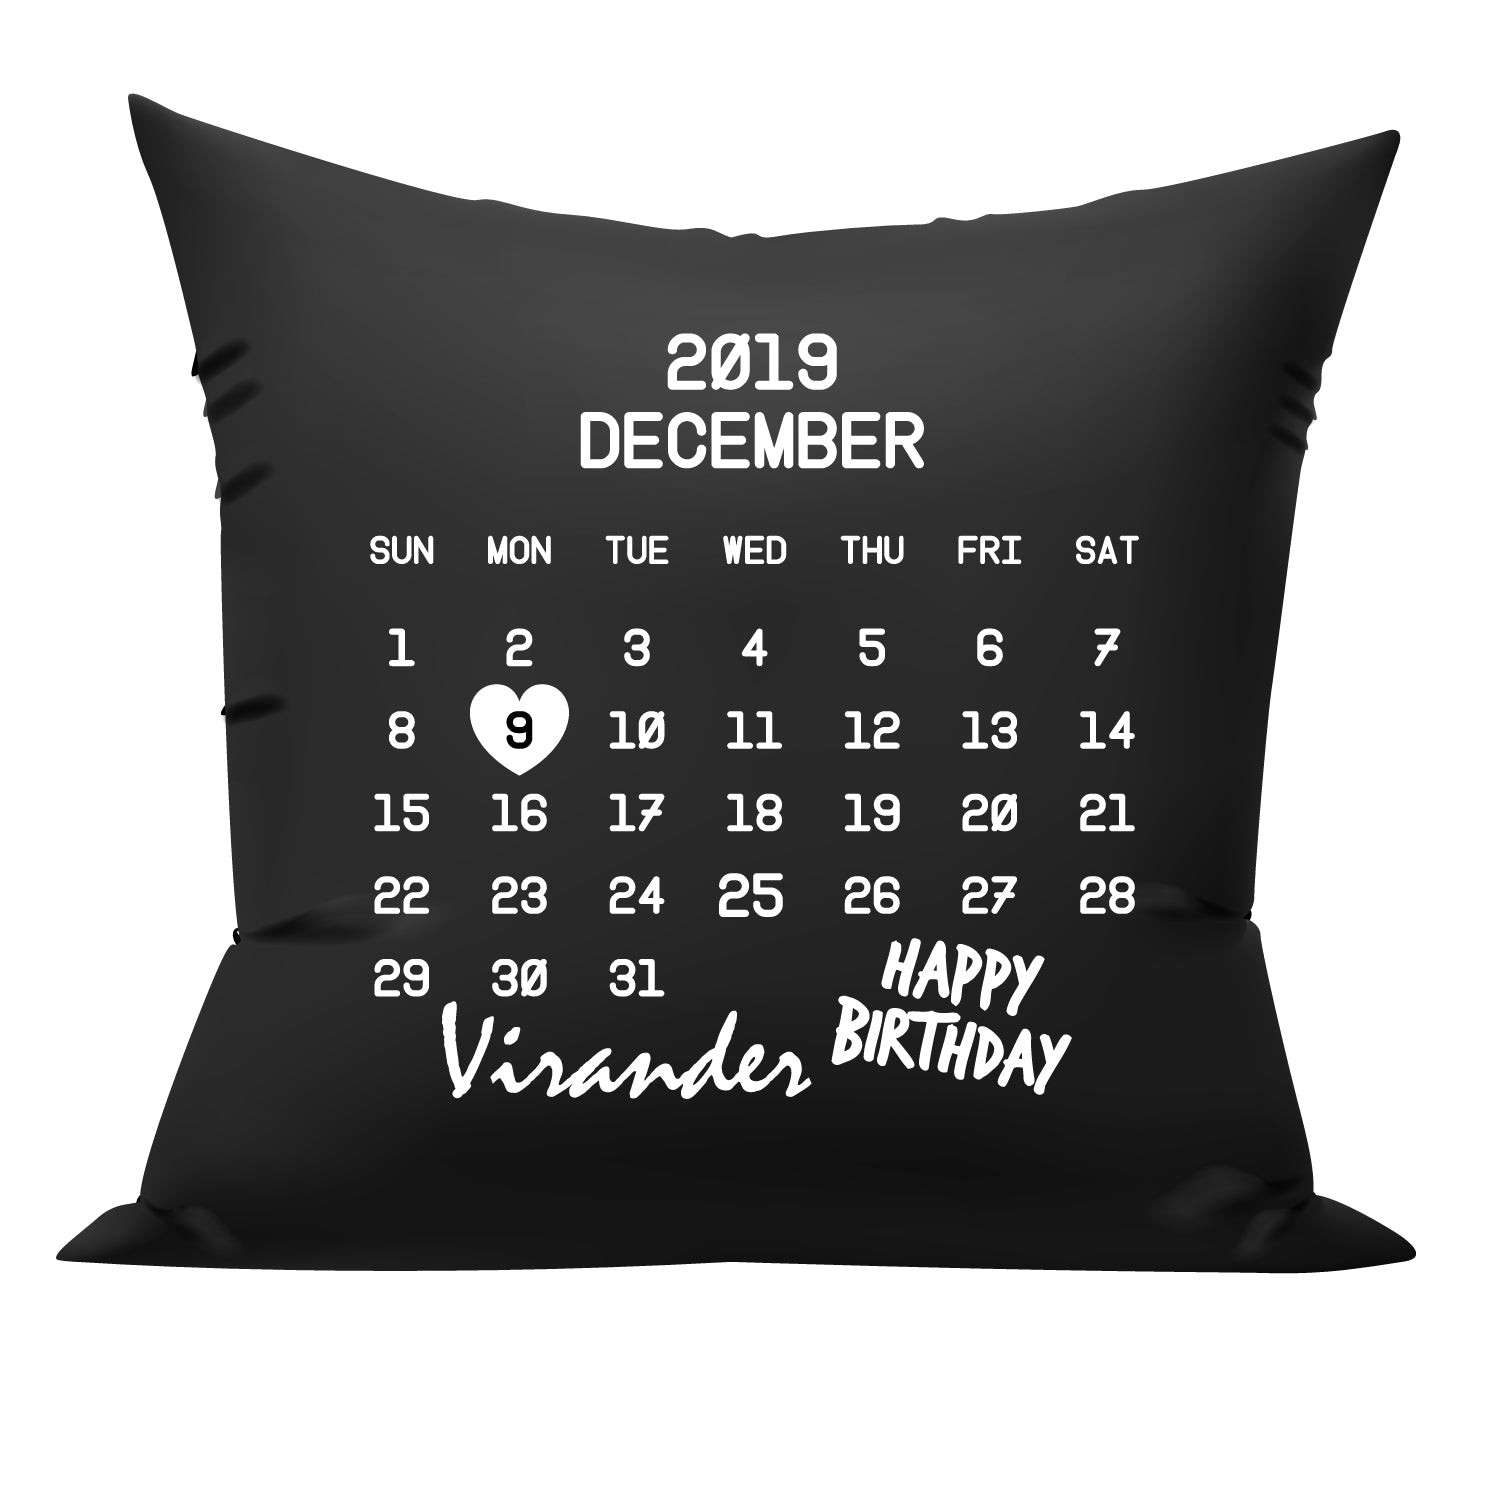 personalized gifts cushions